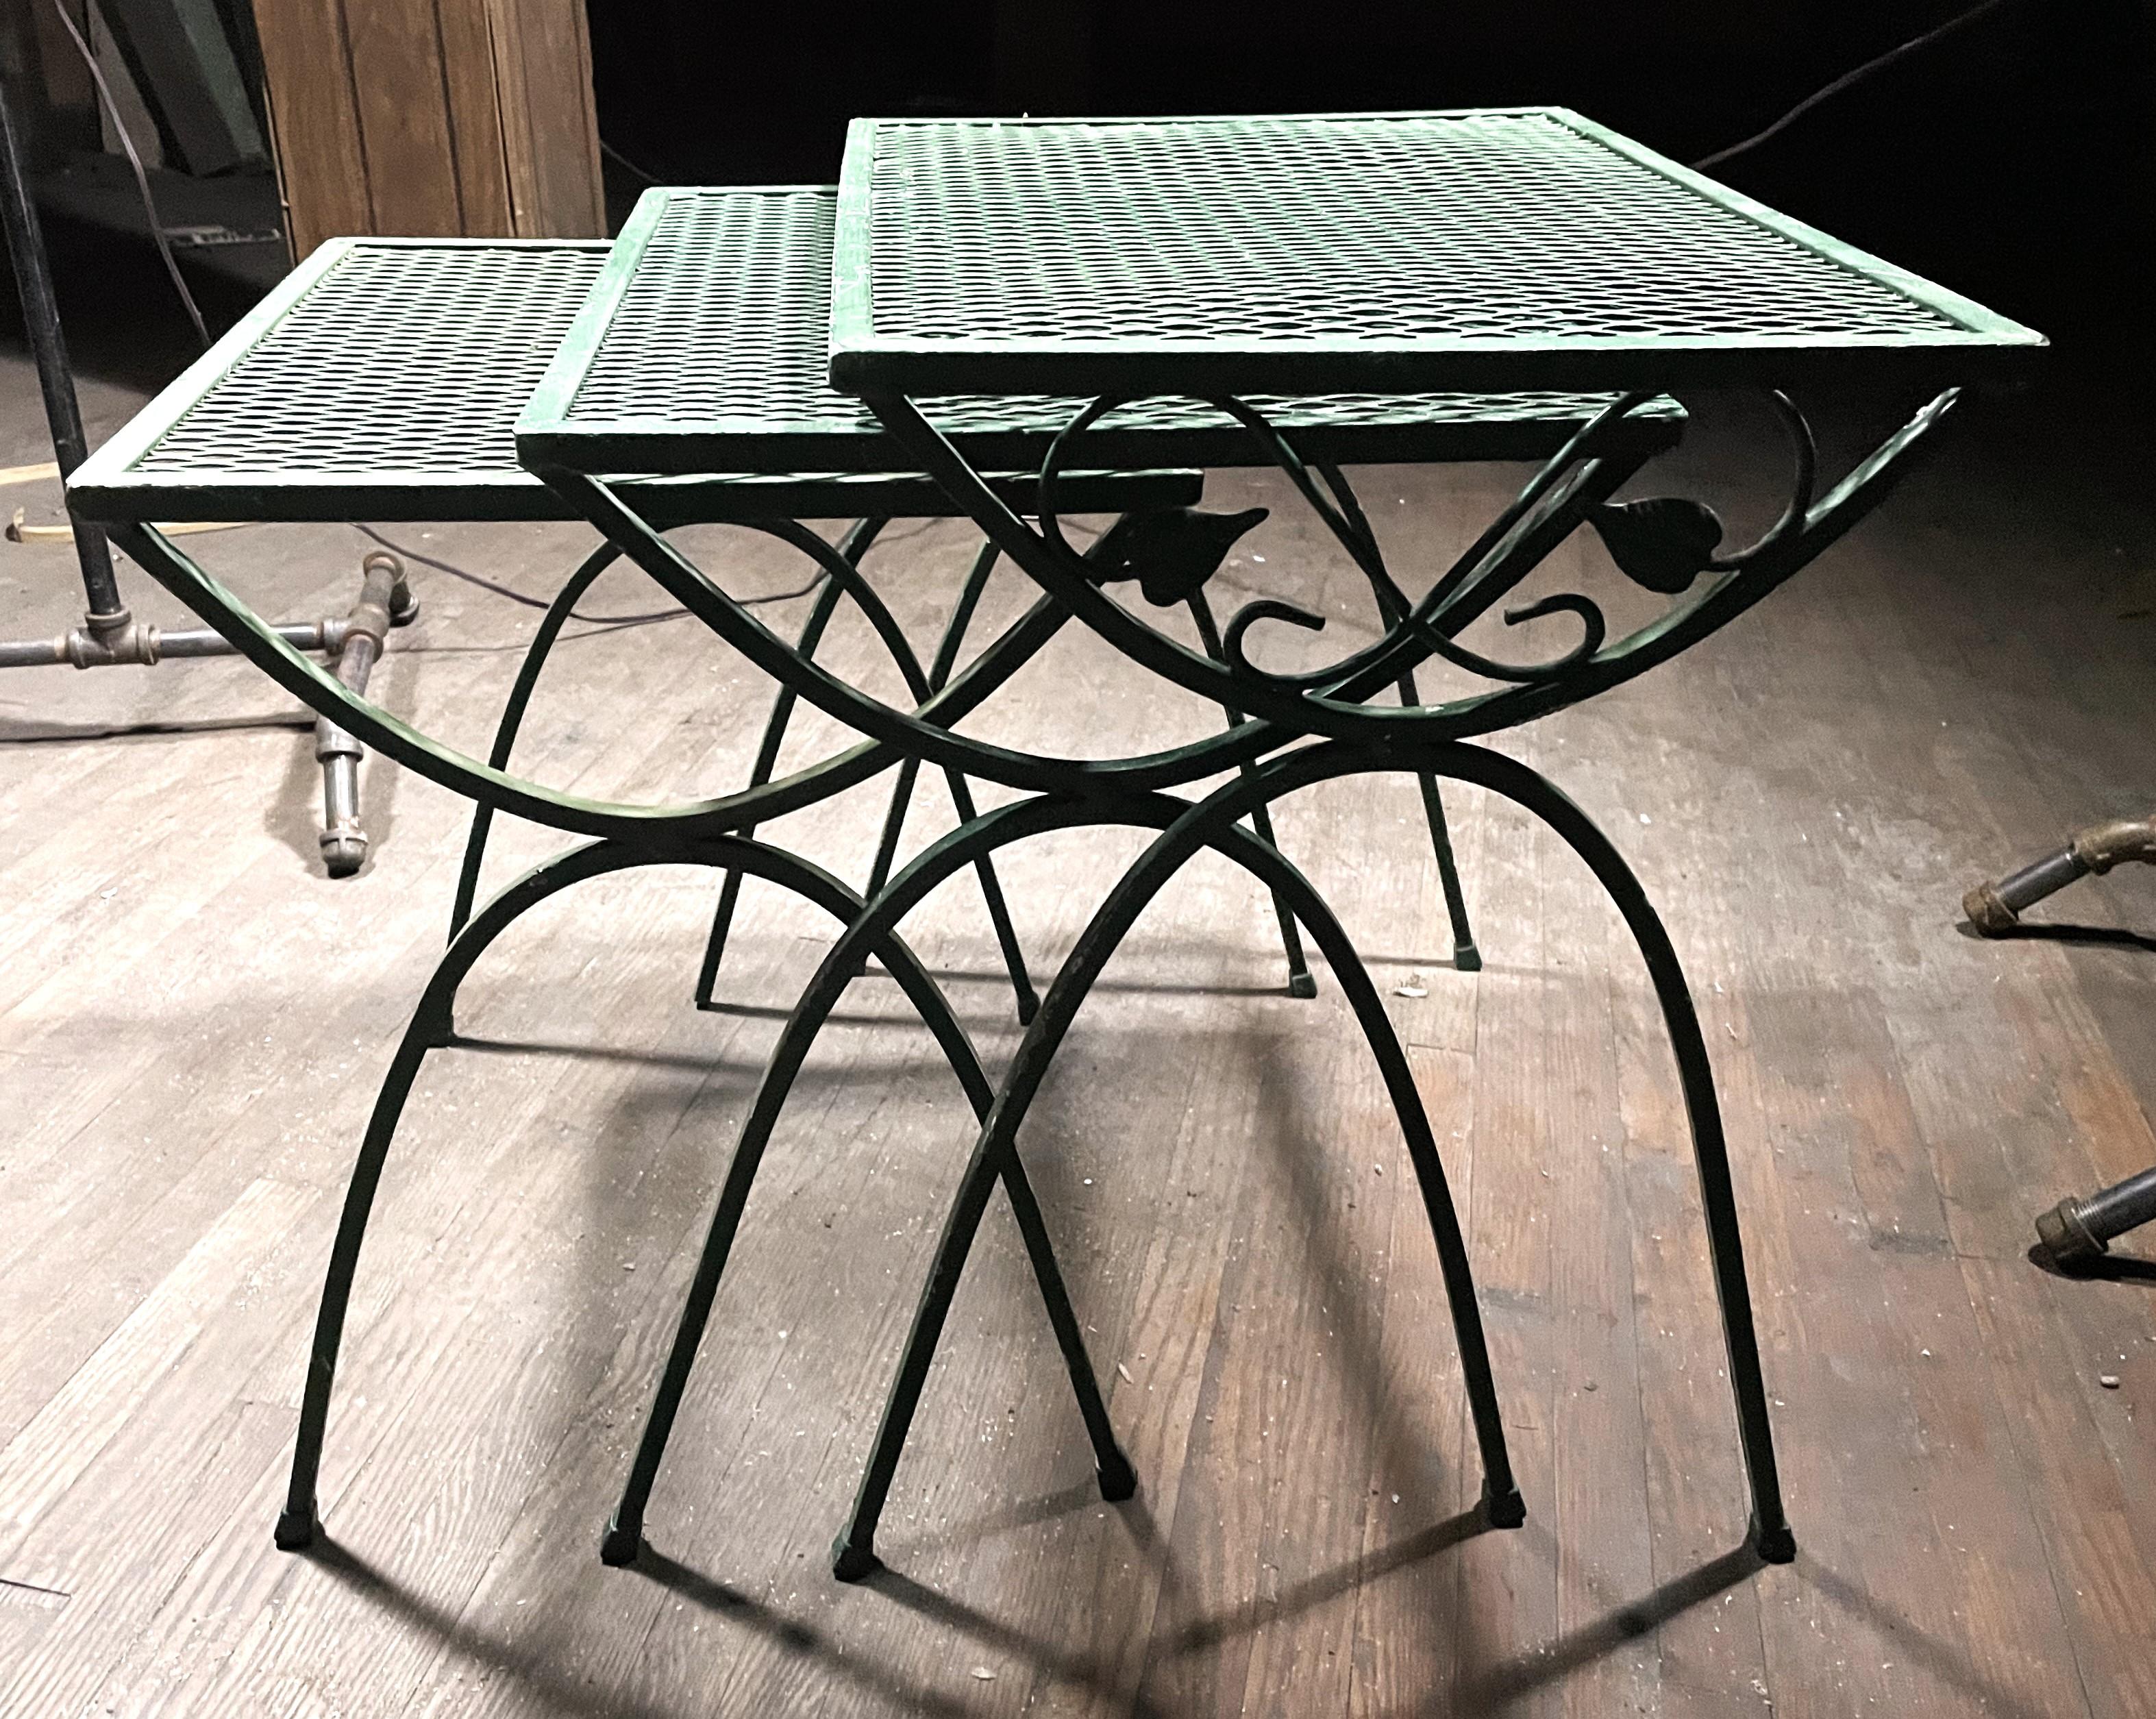 This is a very sweet set of three wrought iron nesting tables by Salterini in the simple but lovely ivy and vine pattern that have been painted a bright forest green. They would be fabulous with any wrought iron patio/garden furniture and would make